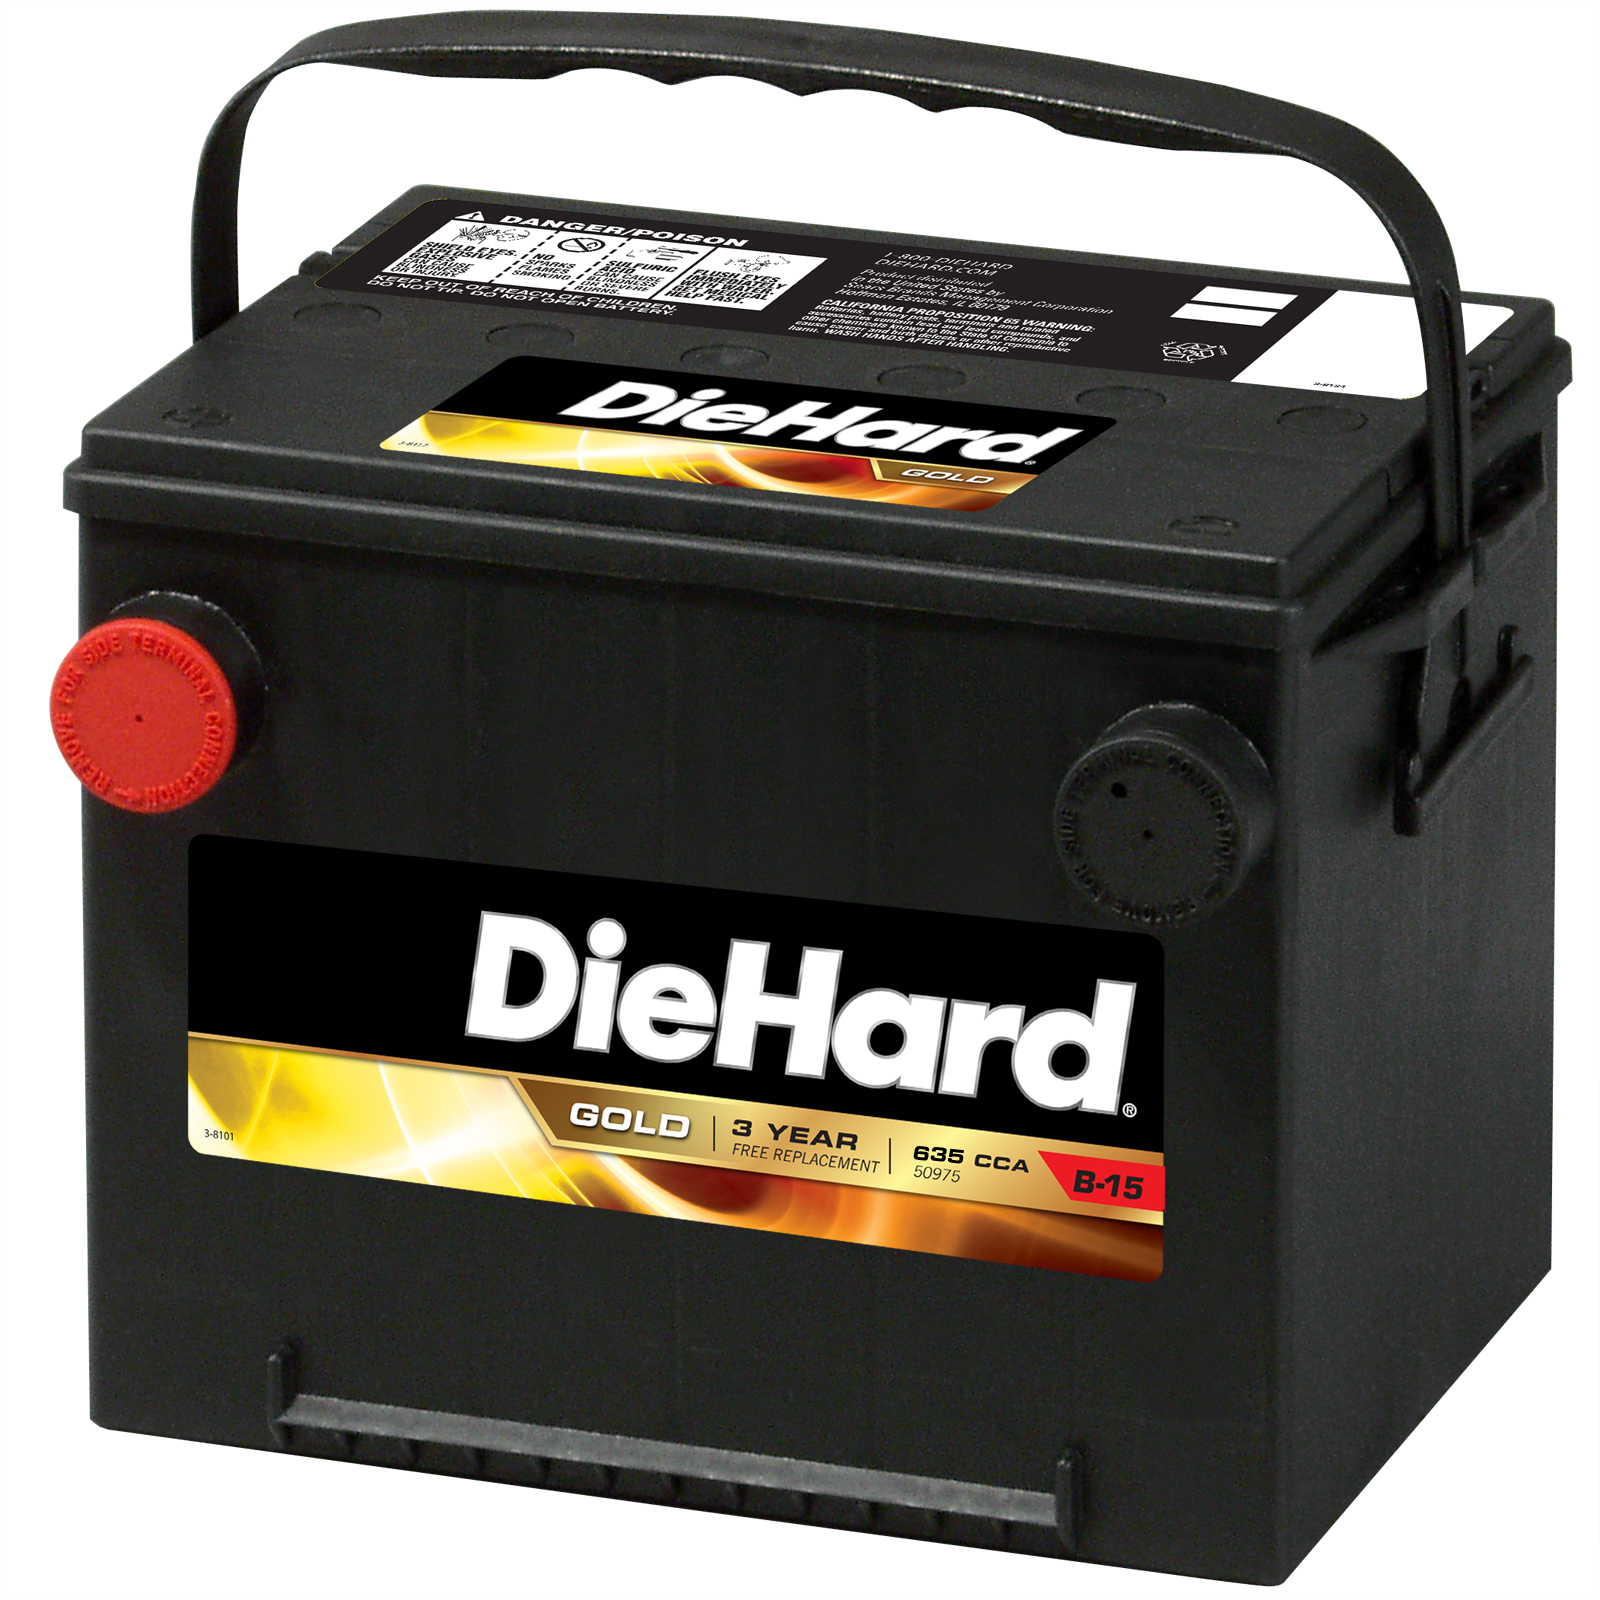 DieHard Gold Automotive Battery - Group Size EP-75 (Price with Exchange)